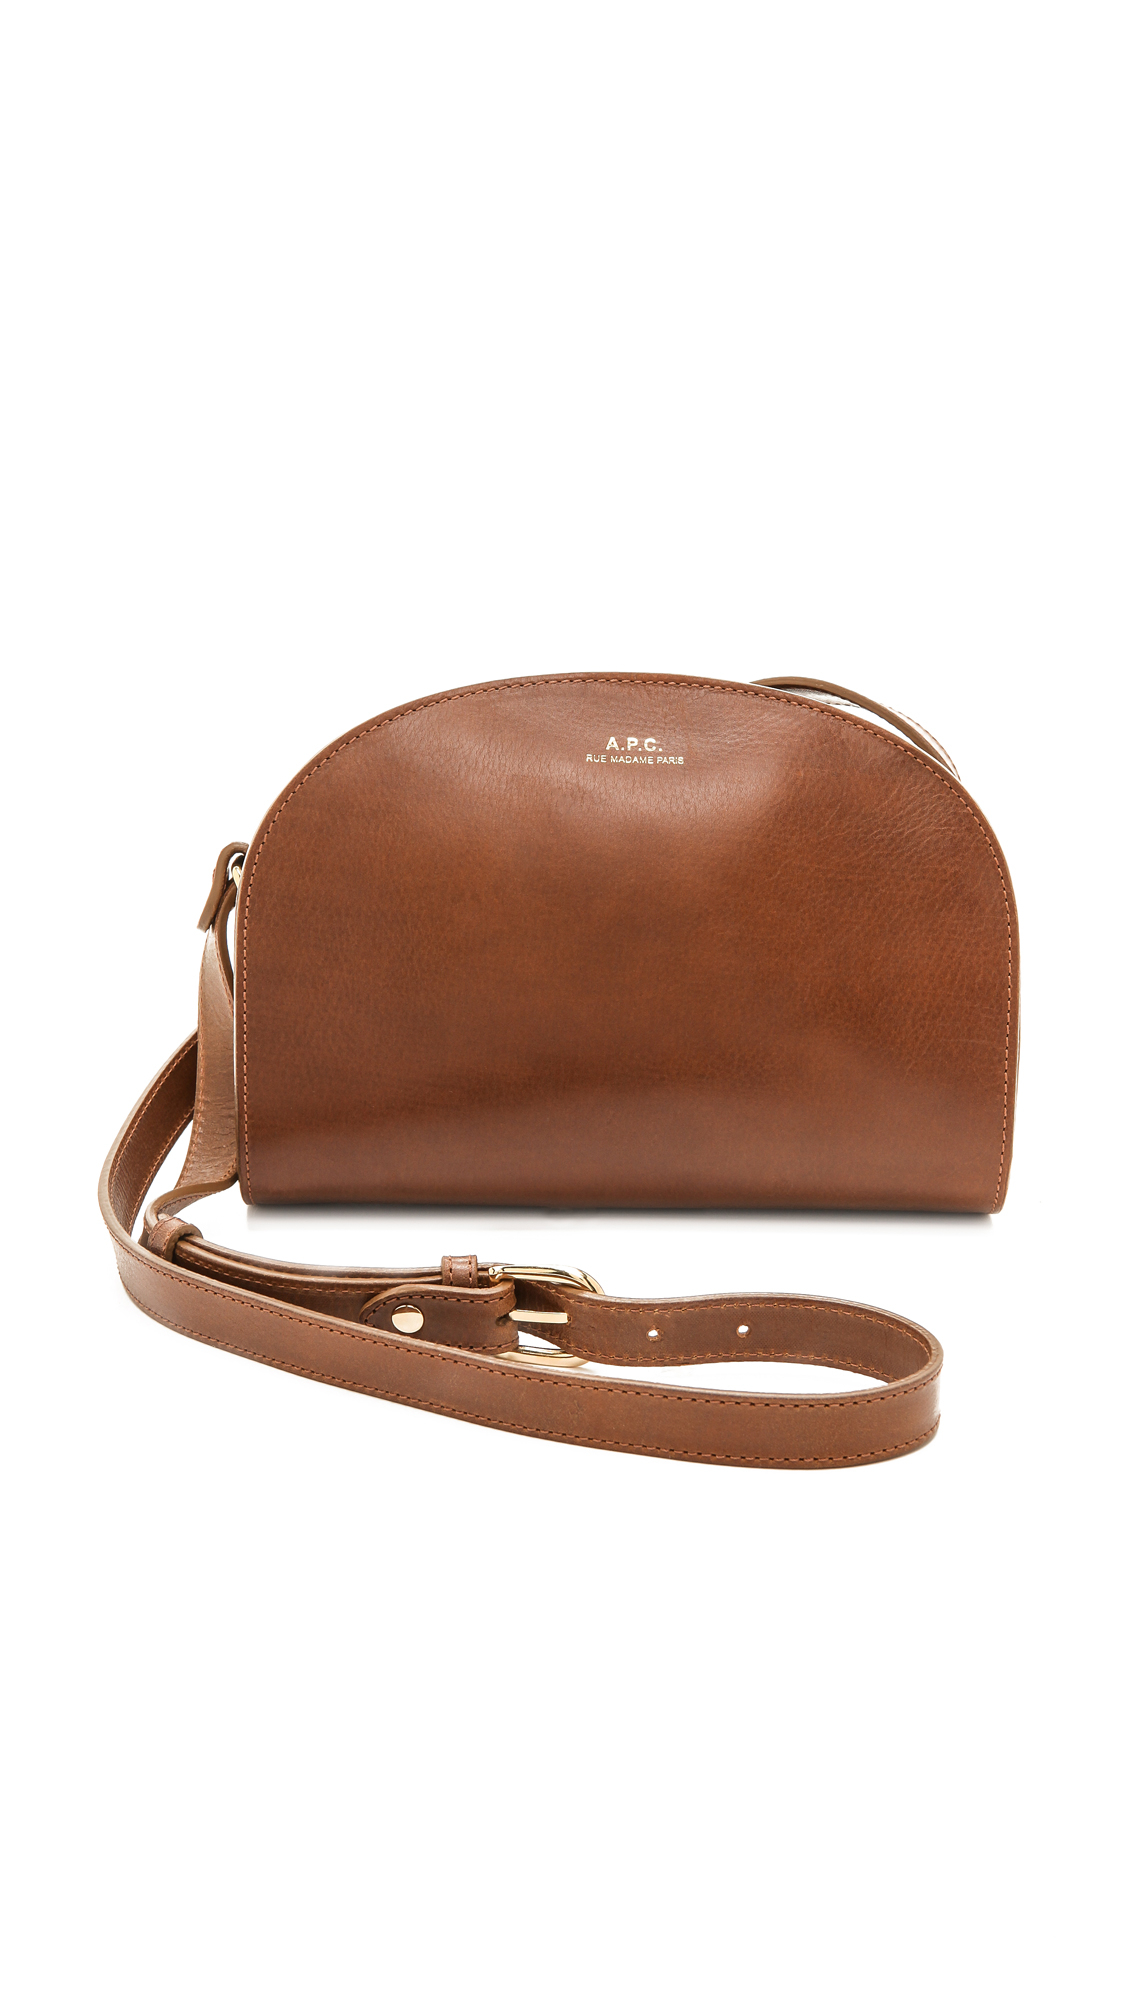 A.P.C. Leather Half Moon Bag in Brown - Lyst